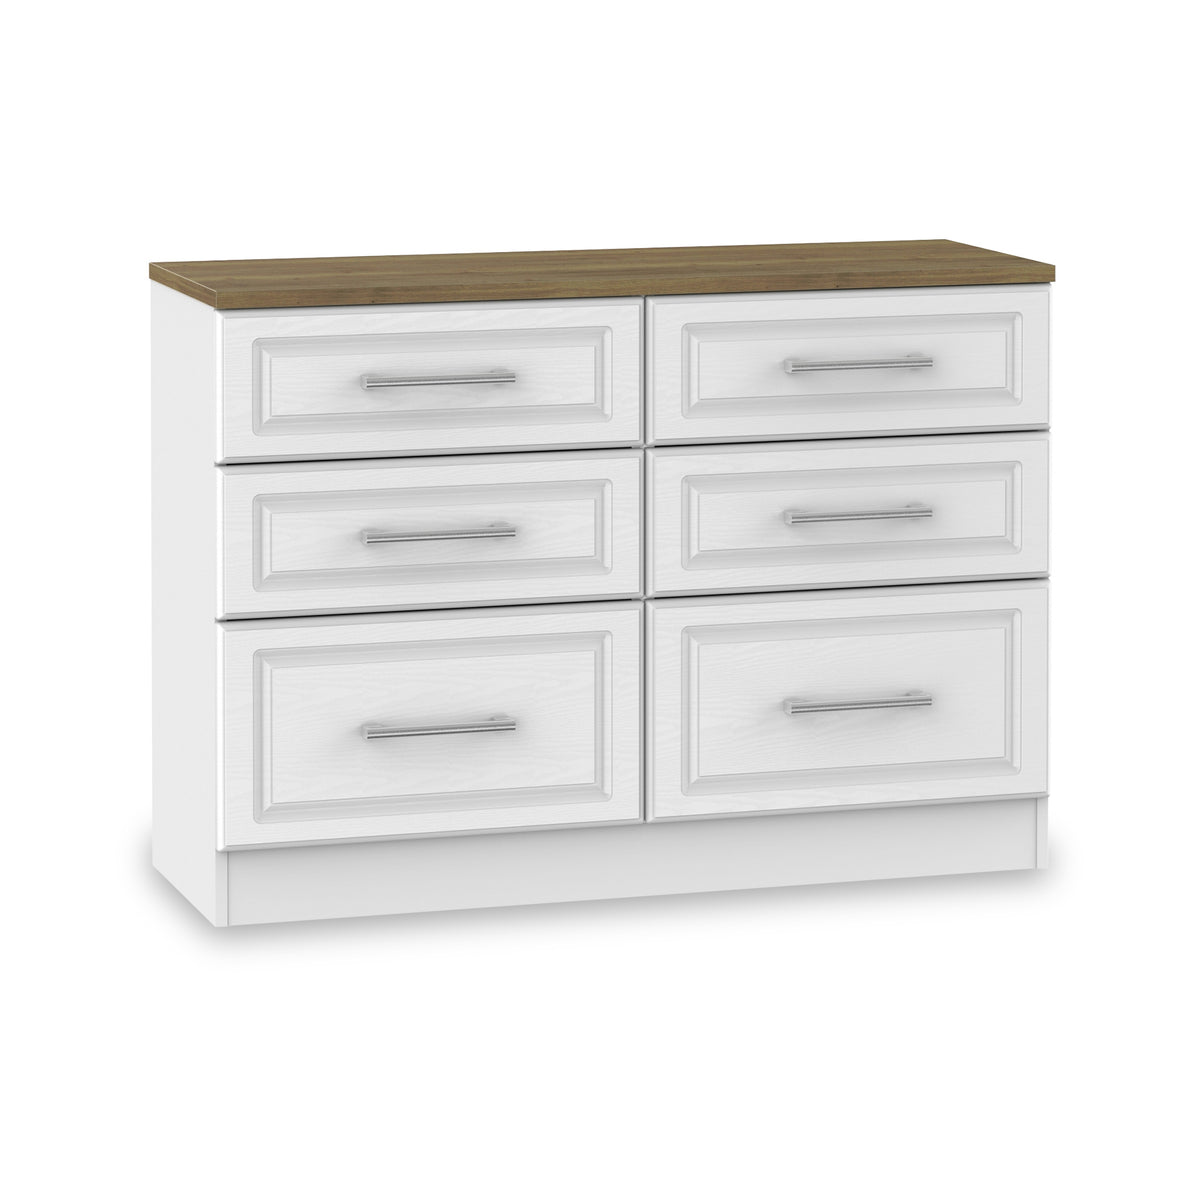 Talland White 6 Drawer Wide Chest by Roseland Furniture